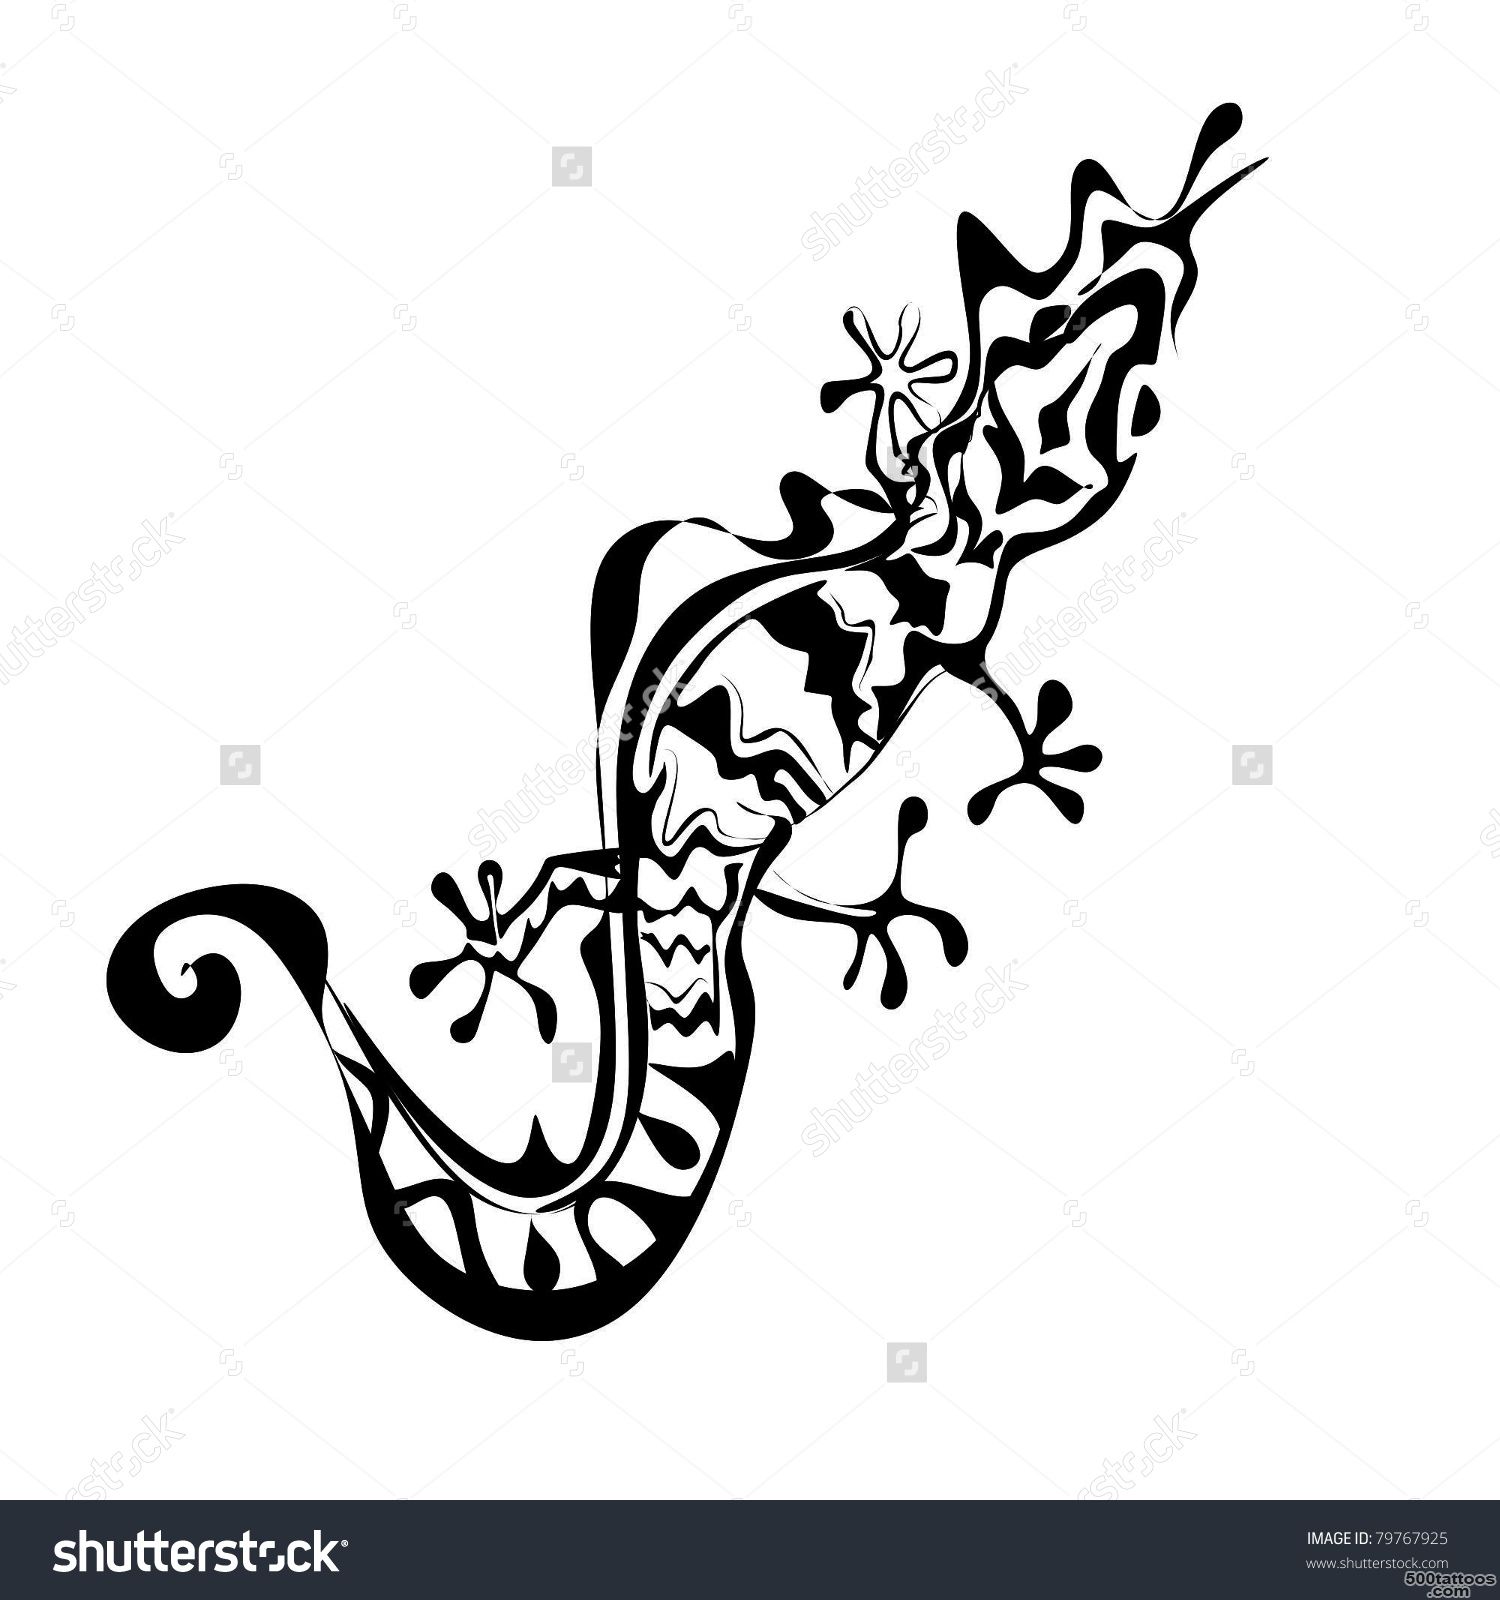 Lizard Tattoo Stock Photos, Images, amp Pictures  Shutterstock_26